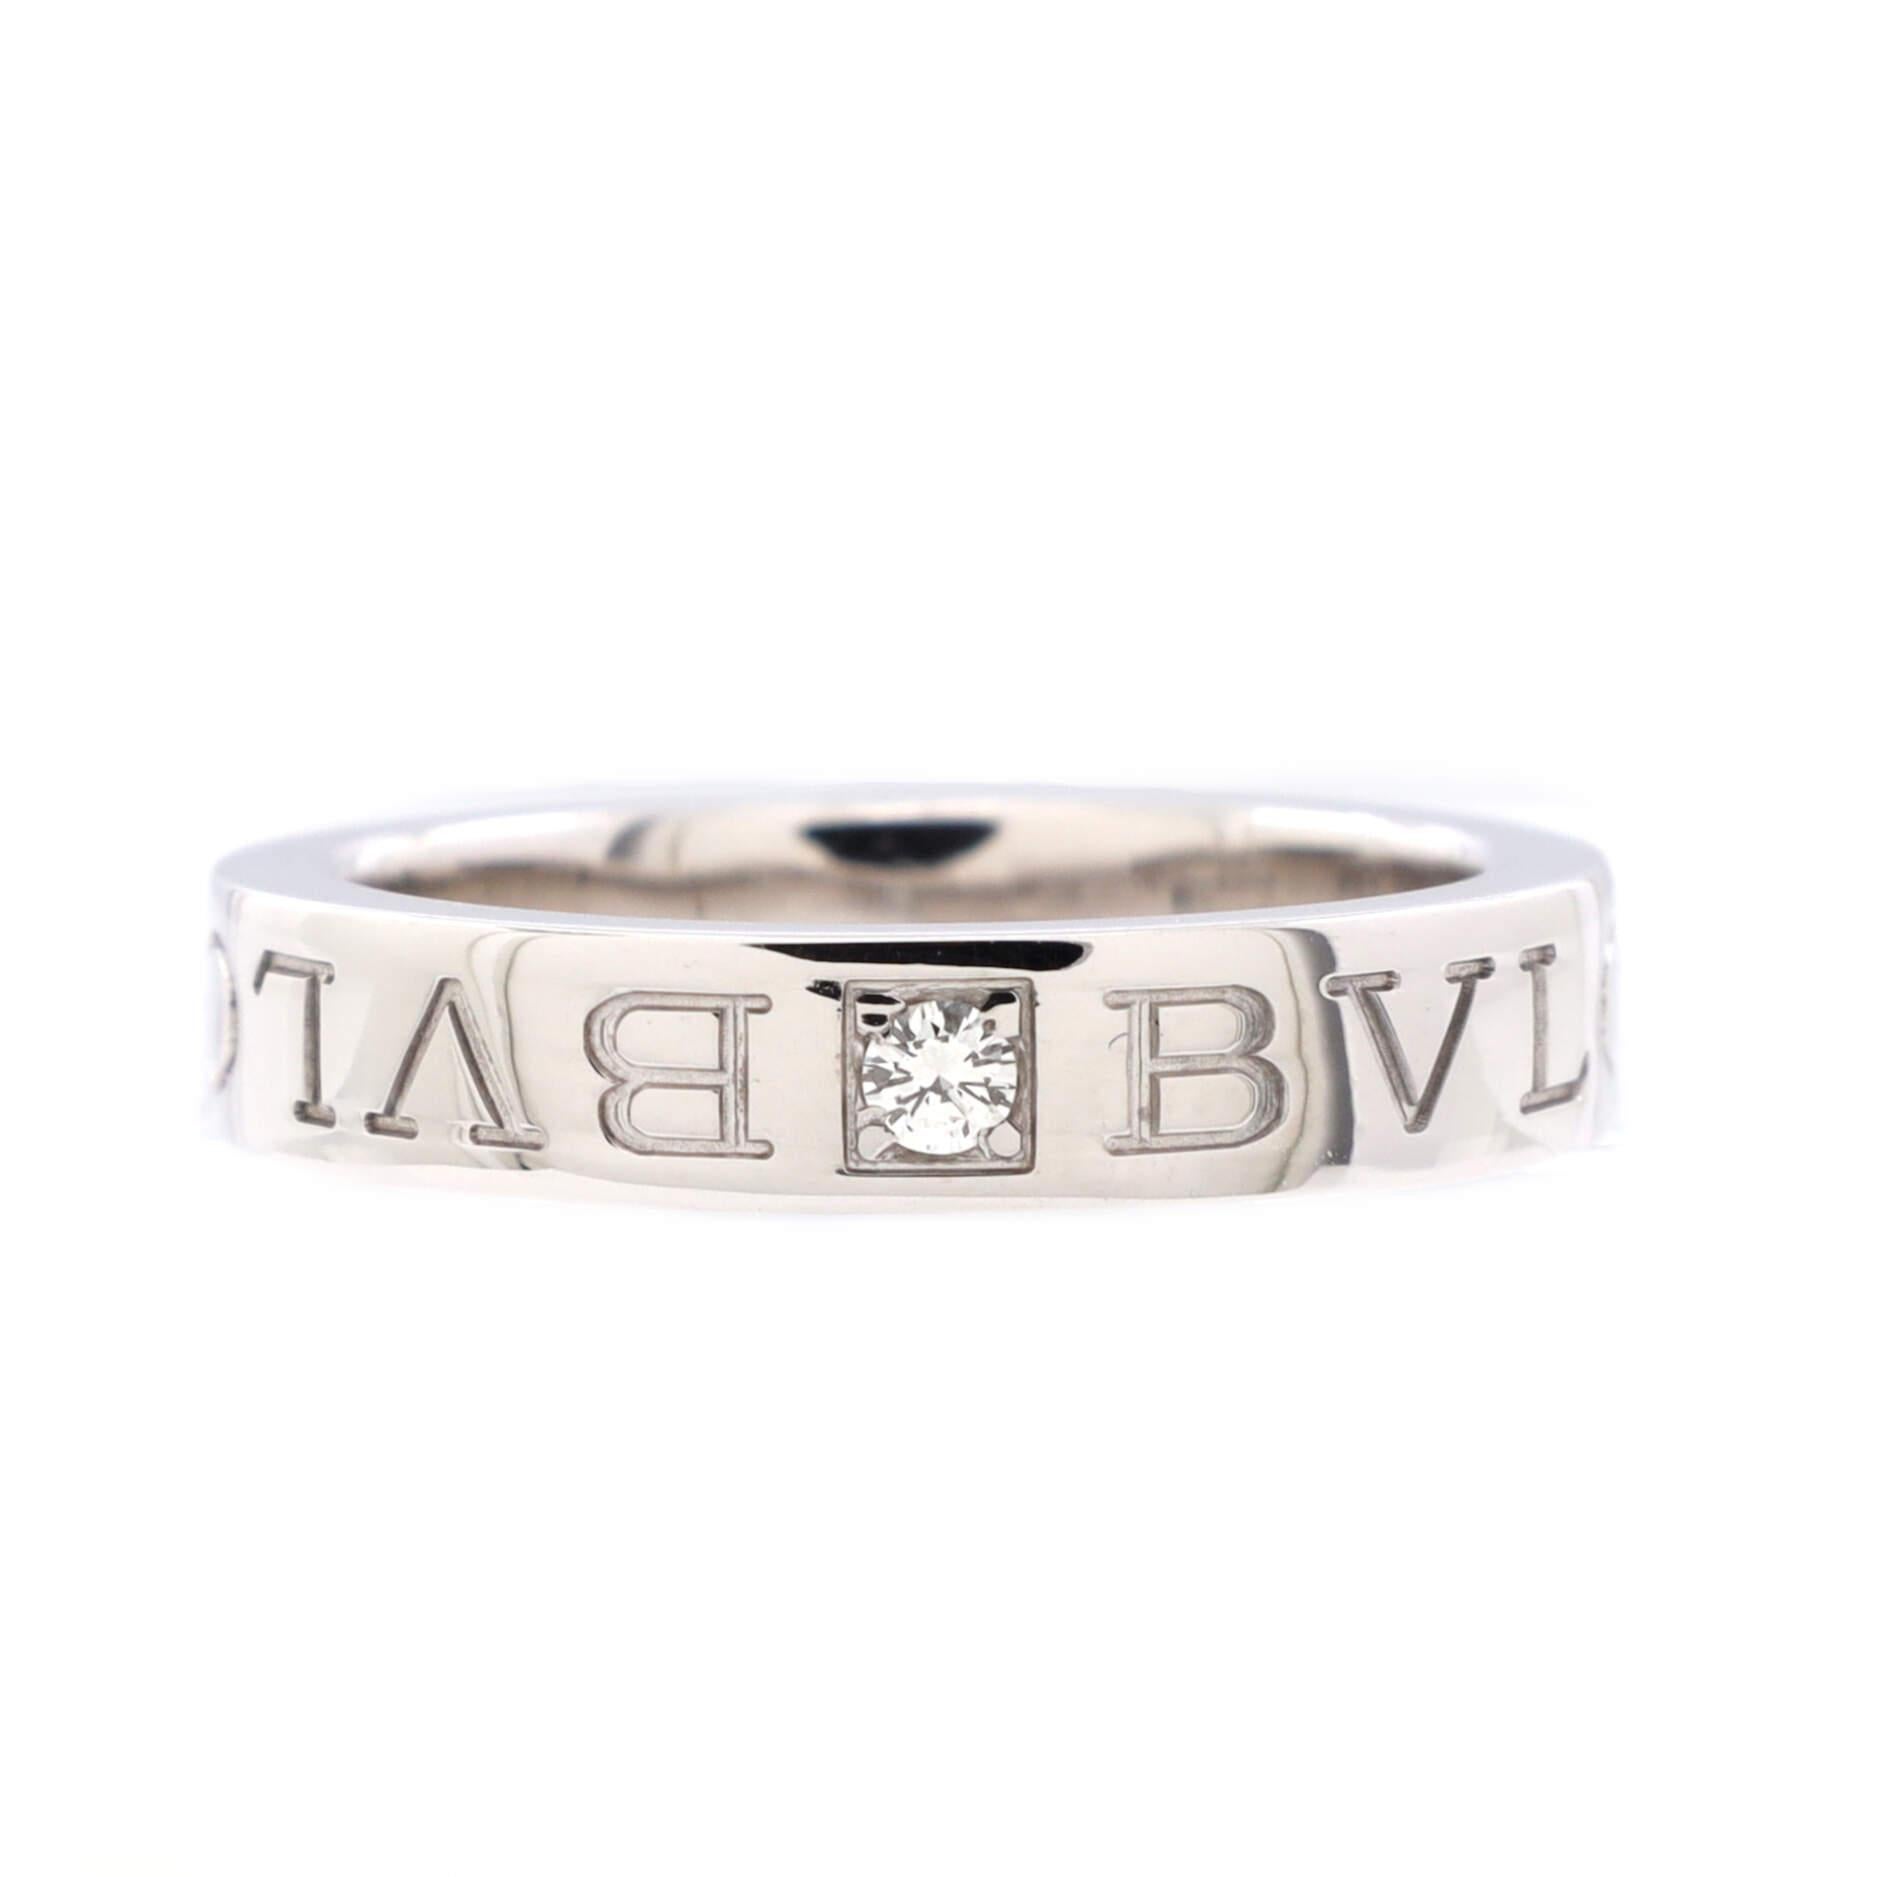 Condition: Great. Minor wear throughout.
Accessories: No Accessories
Measurements: Size: 5.5, Width: 4.00 mm
Designer: Bvlgari
Model: BVLGARI Band Ring 18K White Gold with Diamond
Exterior Color: White Gold
Item Number: 202545/1